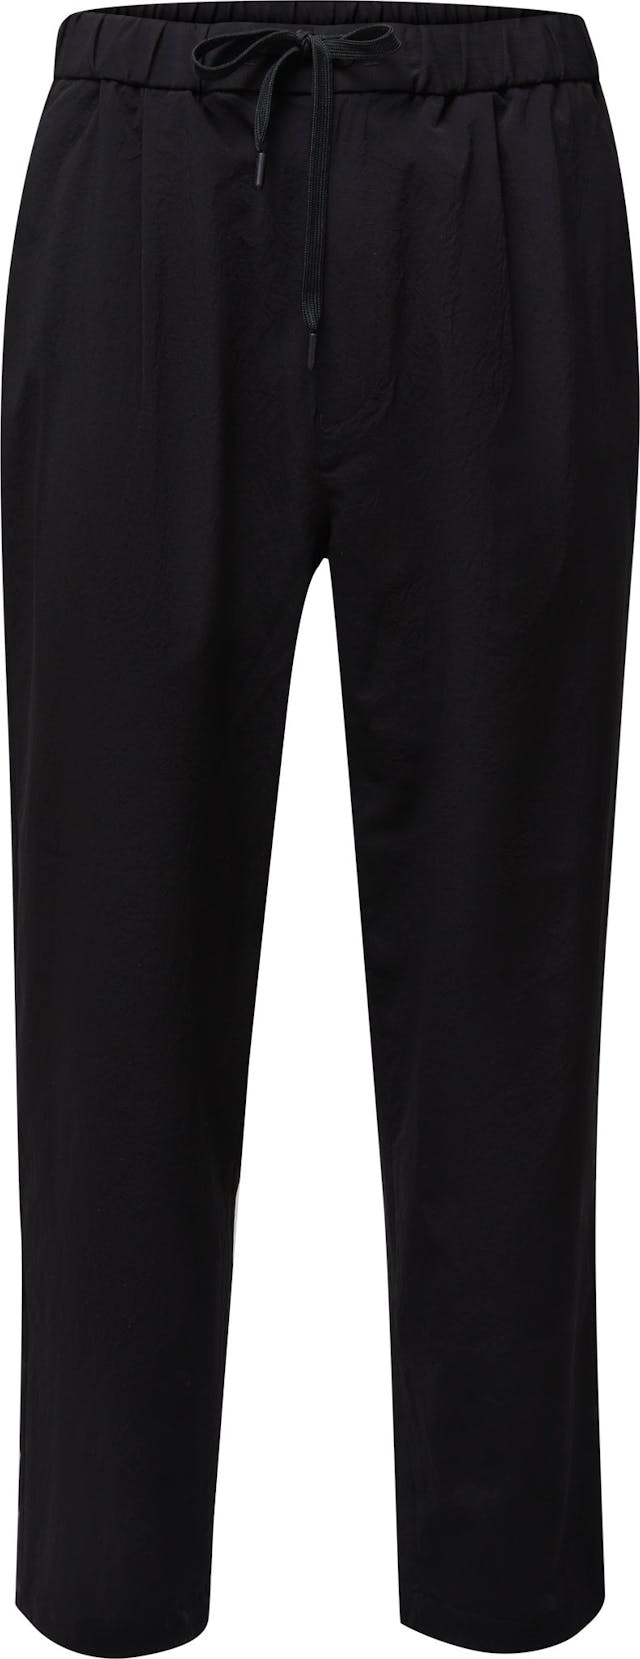 Product image for Quick Dry Pants - Men's